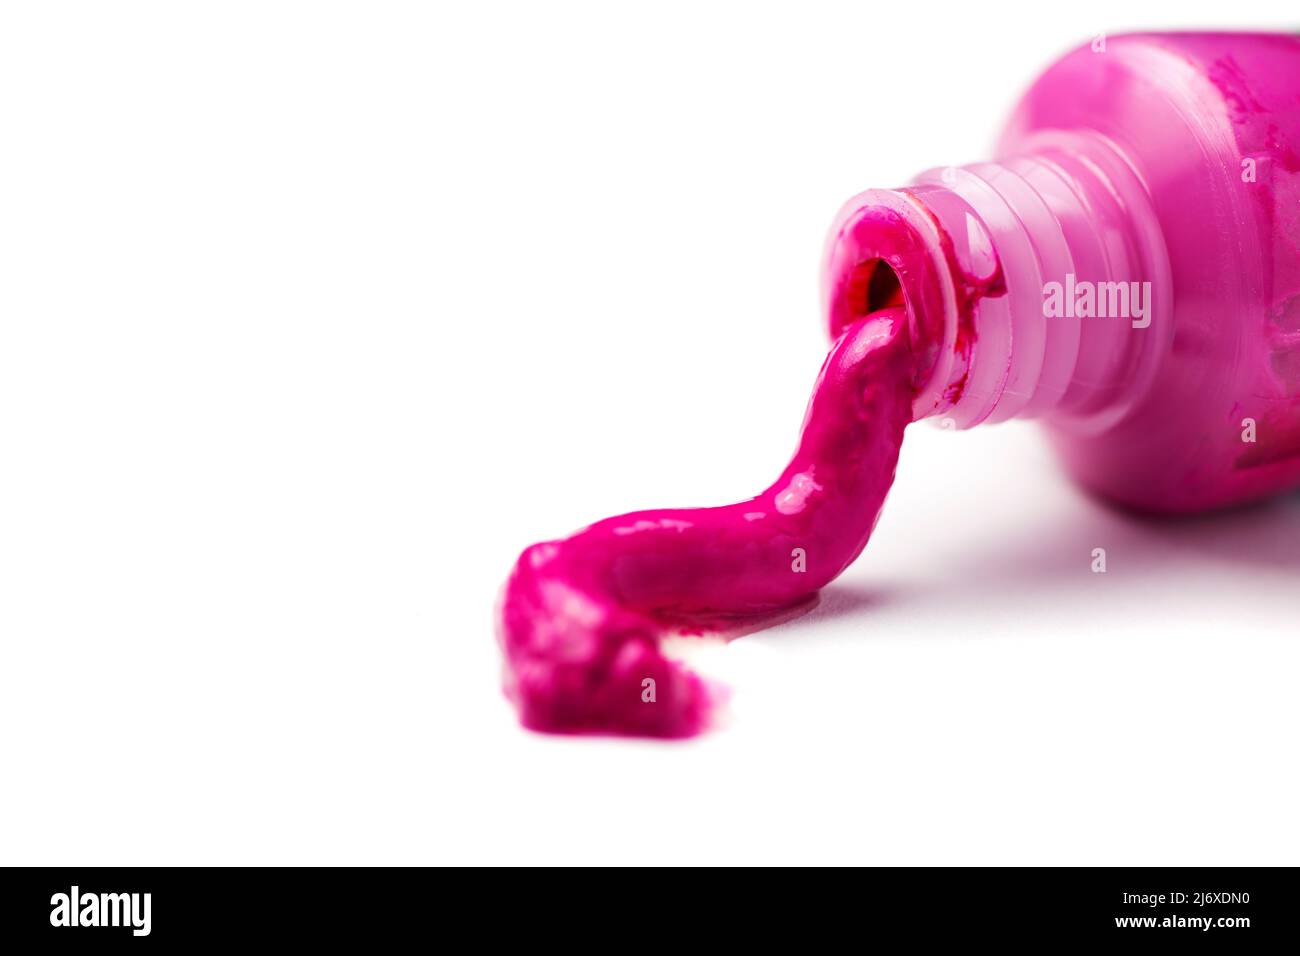 Close-up of an open tube of magenta artist paint spilling out on a white background. Stock Photo